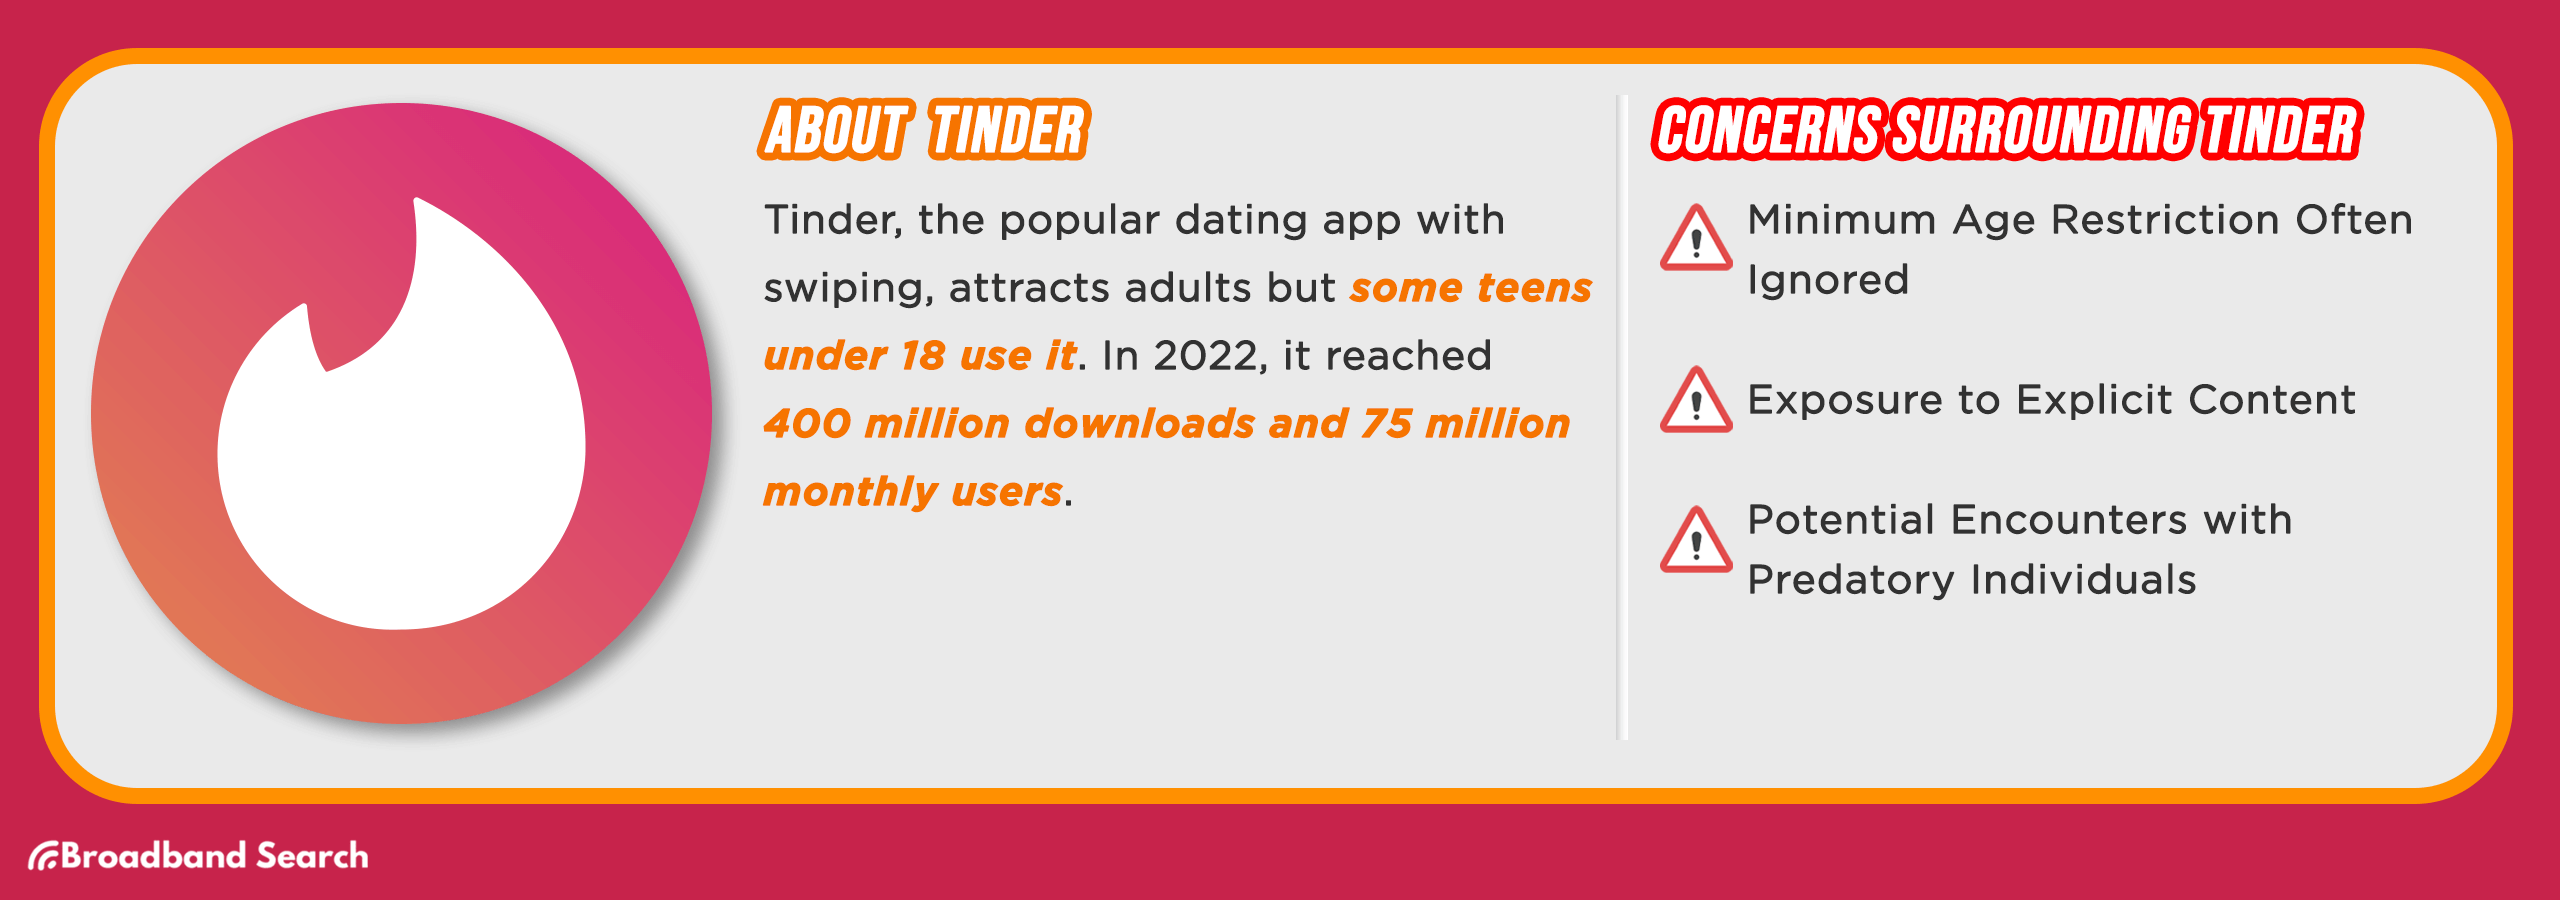 Statistics on Tinder and concerns surrounding usage of the social media app